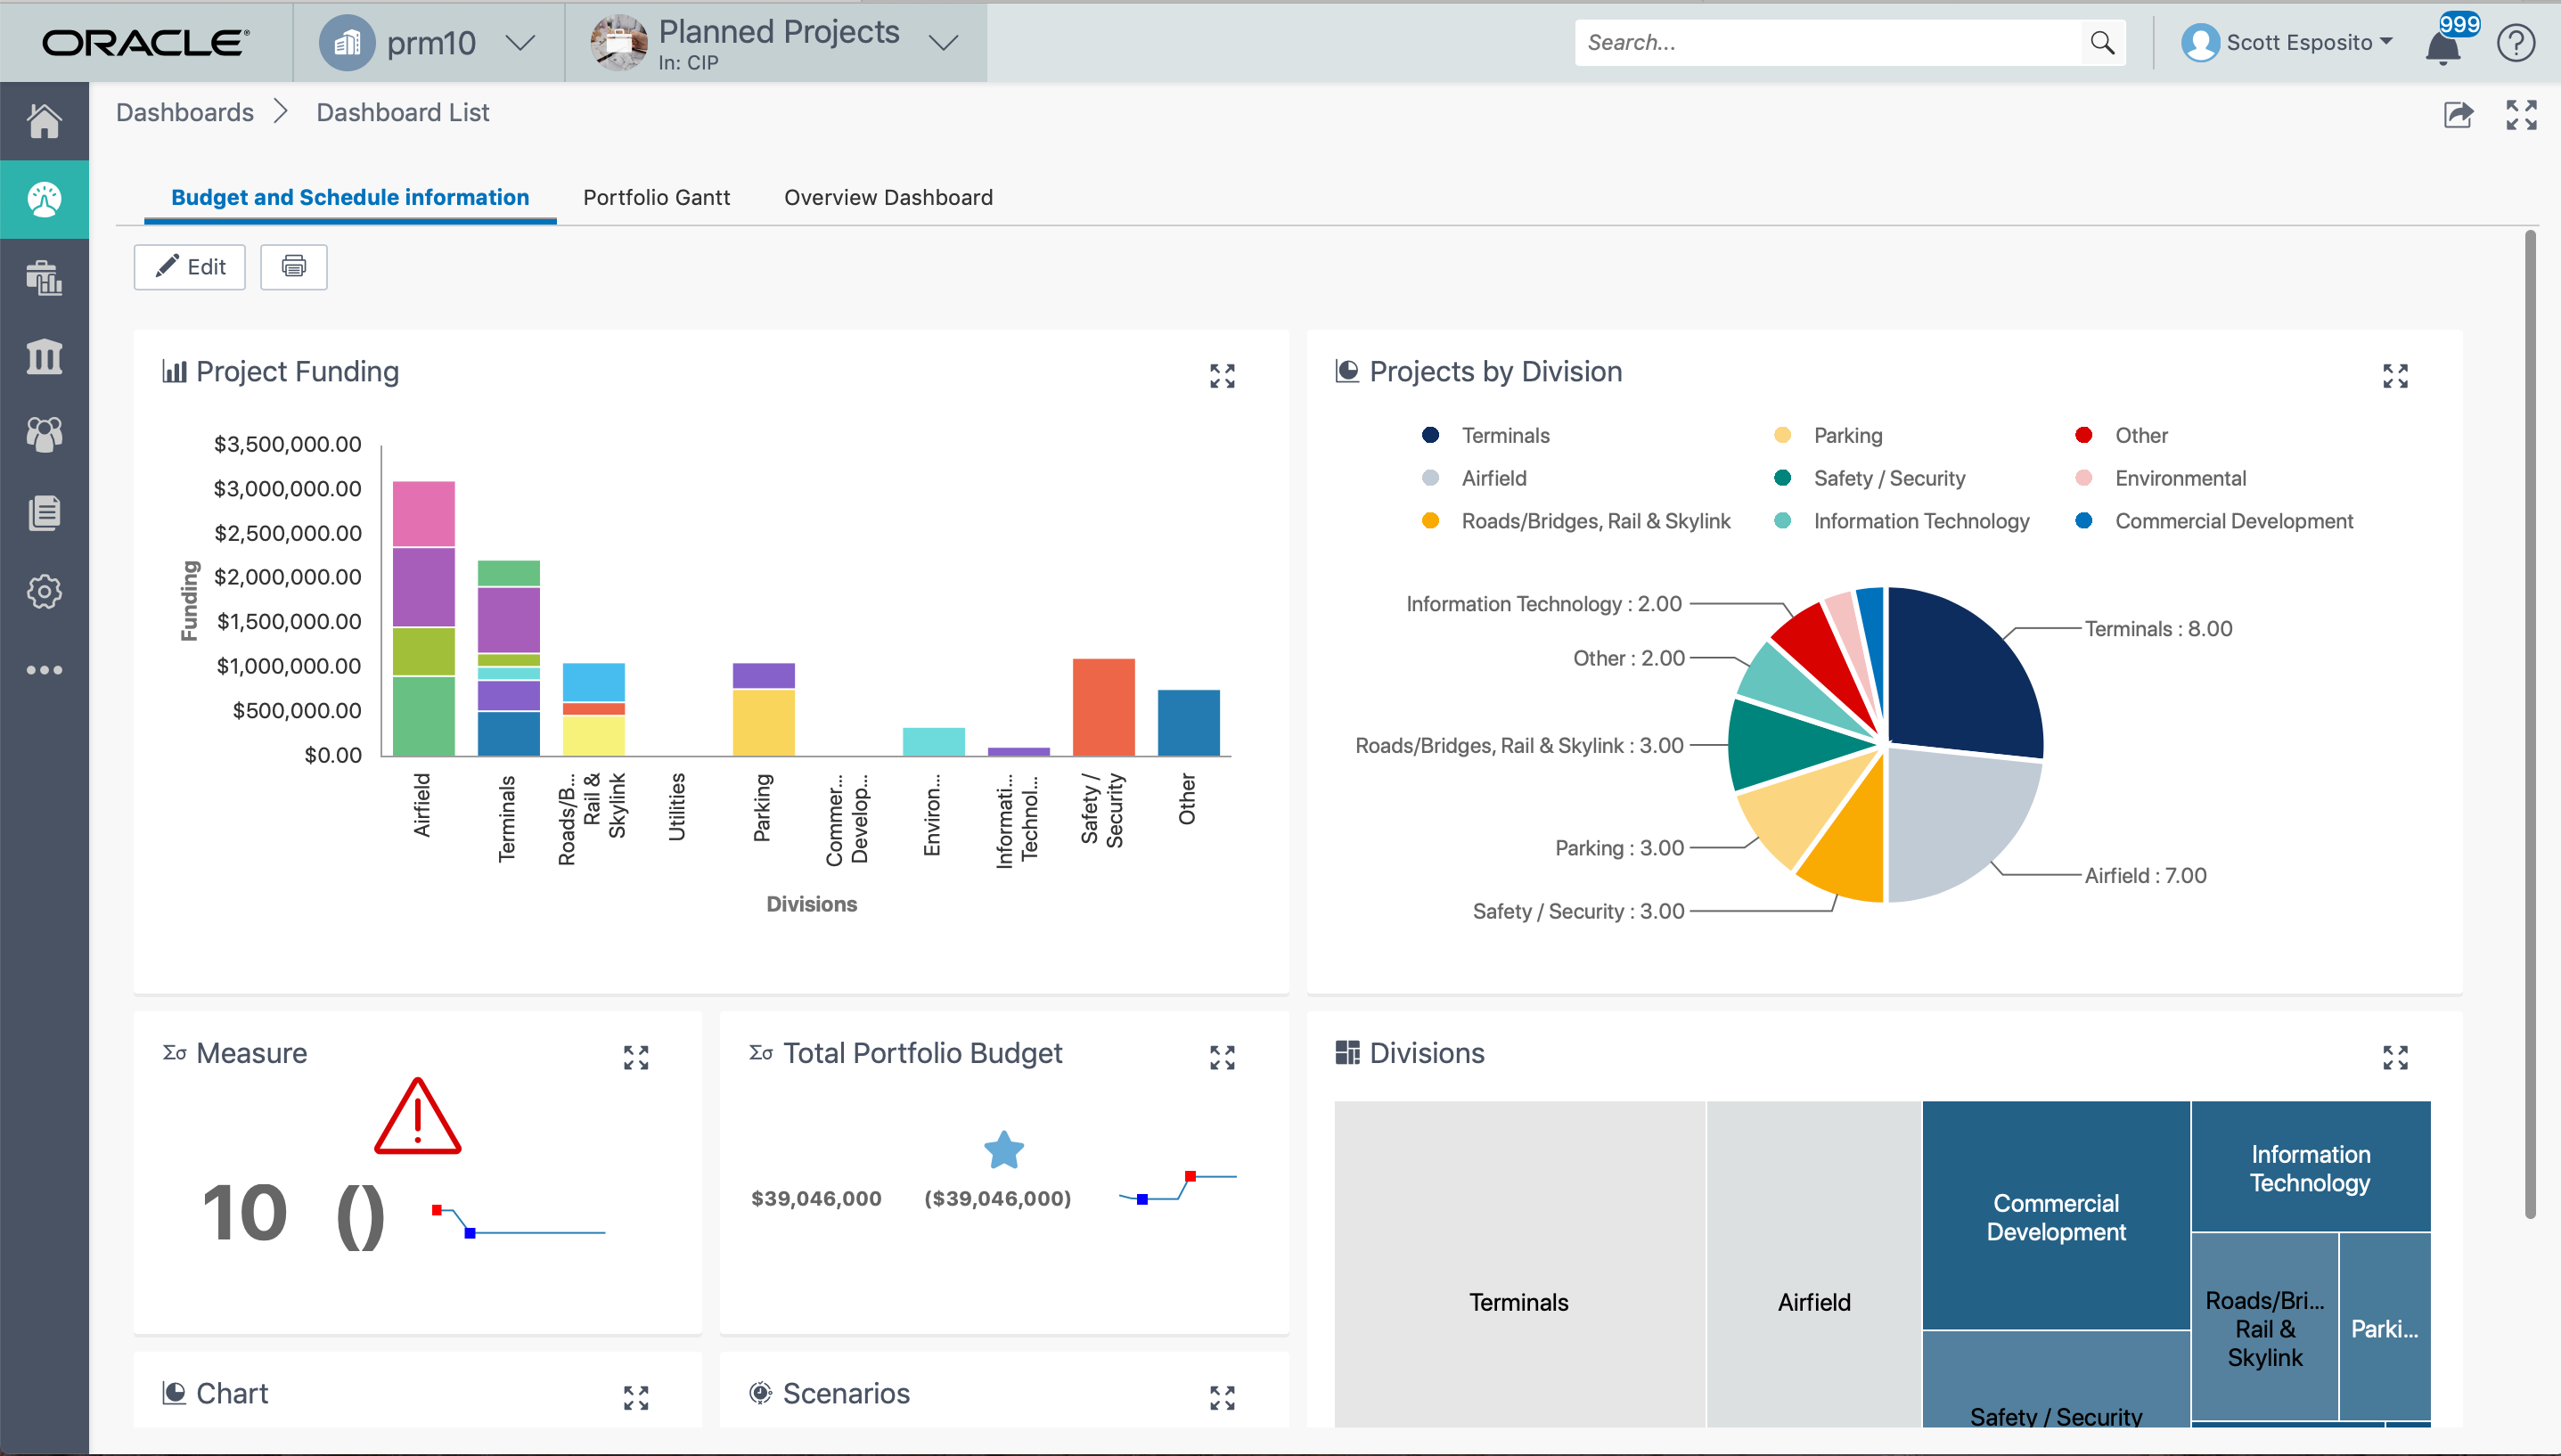 Oracle Primavera Cloud Software - Monitor and Optimize Portfolio Performance:
Gain full visibility to evaluate portfolio health and performance throughout the project lifecycle. Analyze project portfolio activity, status, and success metrics.